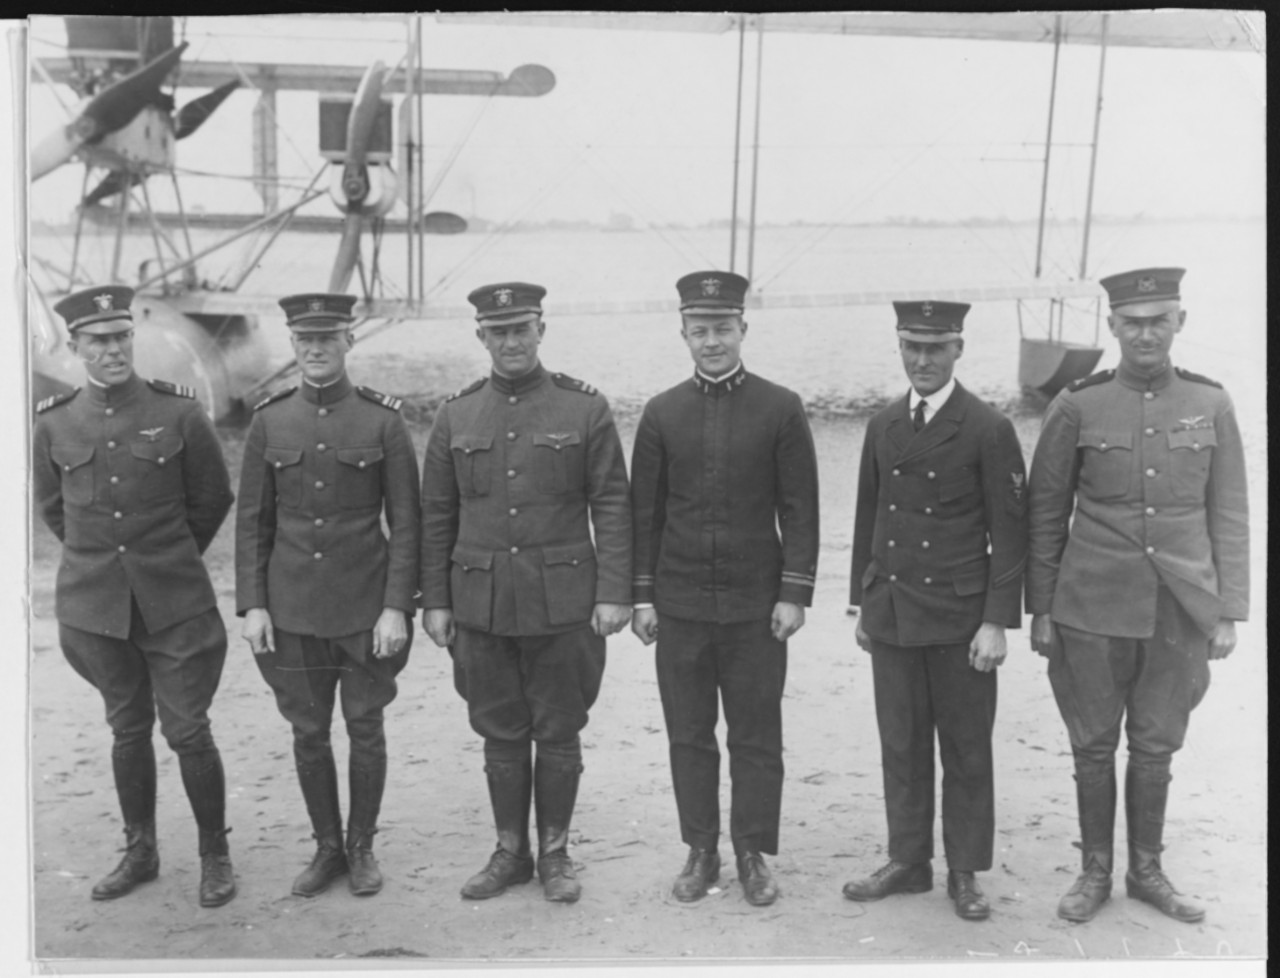 Crew of NC-3 in front of their Plane at Rockaway Beach, New York